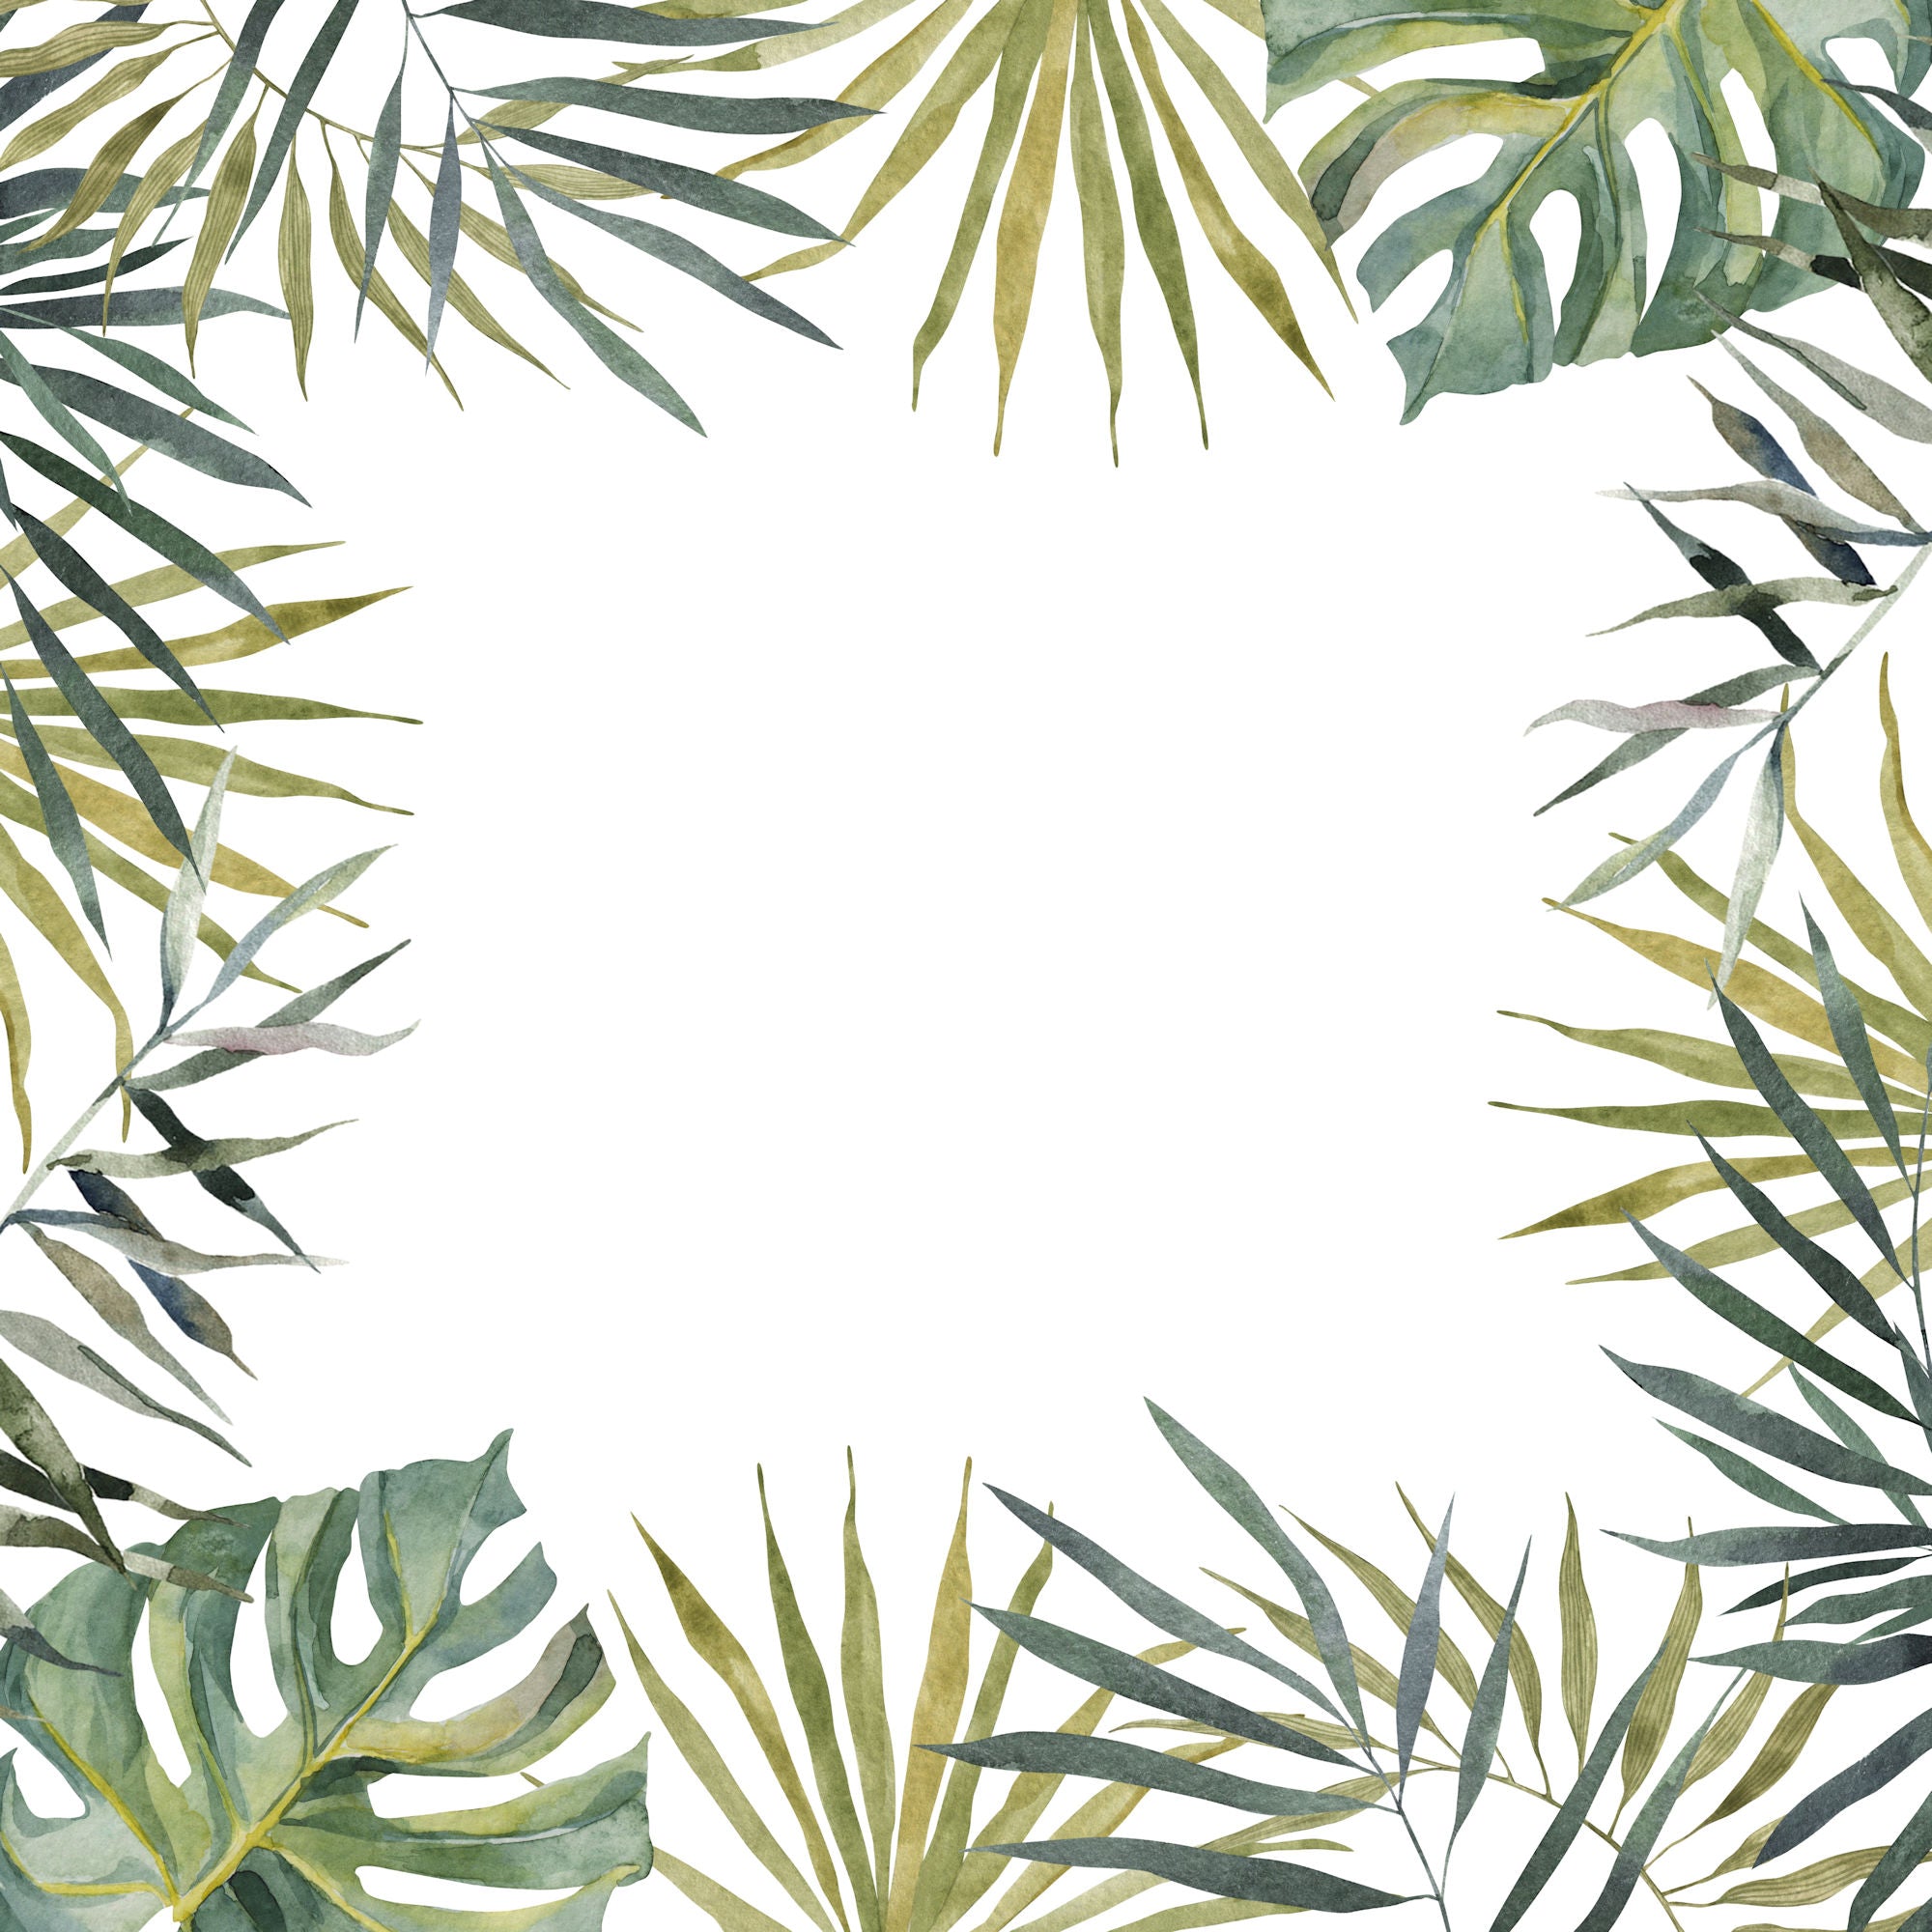 Tropical Paradise Collection Tranquil 12 x 12 Double-Sided Scrapbook Paper by SSC Designs